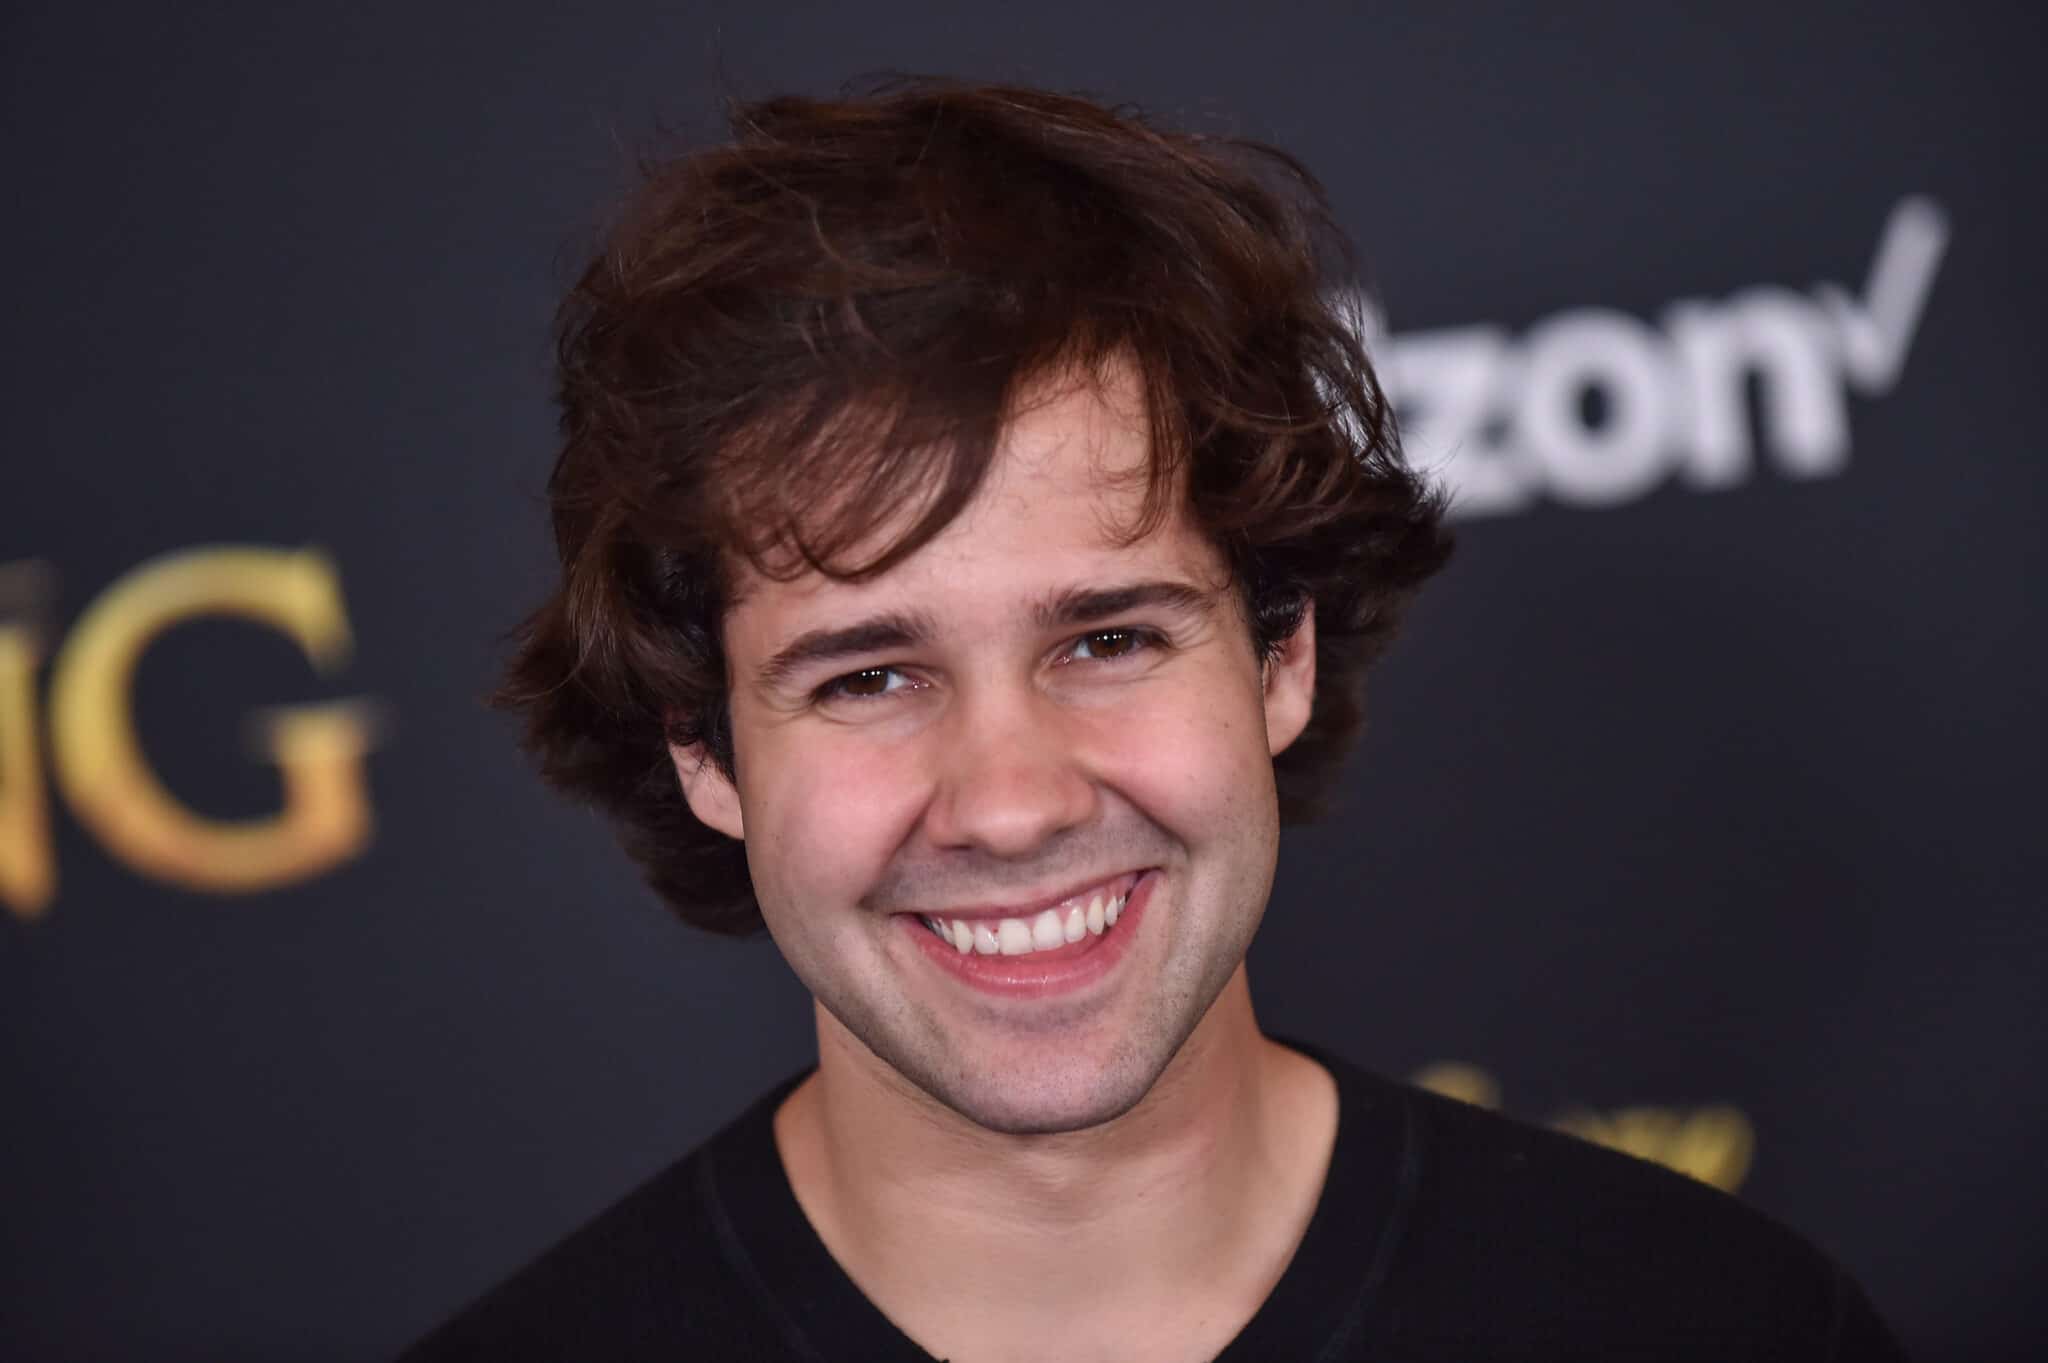 How Much Does David Dobrik Make a Year?